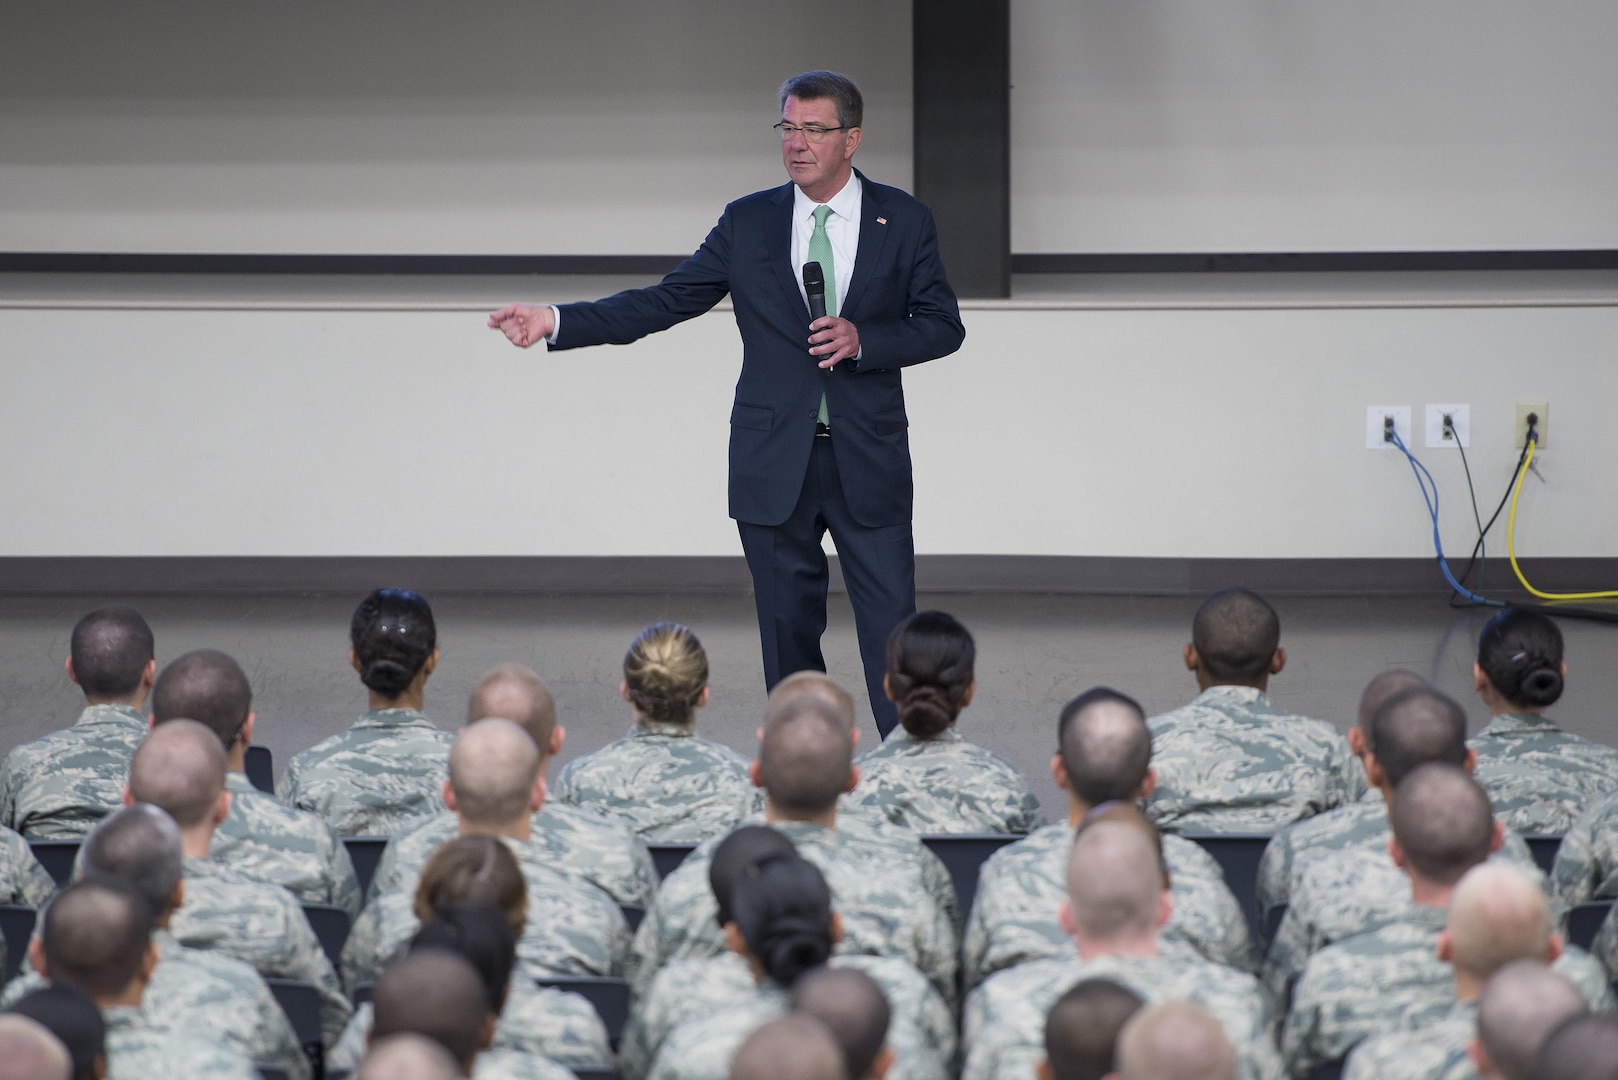 Defense Secretary Ash Carter speaks to U.S. Air Force basic military training trainees at the Pfingston Reception Center, Joint Base San Antonio-Lackland, Nov. 16, 2016.  Carter is on a four-day trip focusing on the readiness of the nation’s force and the effectiveness of the warfighter’s training and equipment.  (U.S. Air Force photo by Sean M. Worrell/Not Released)